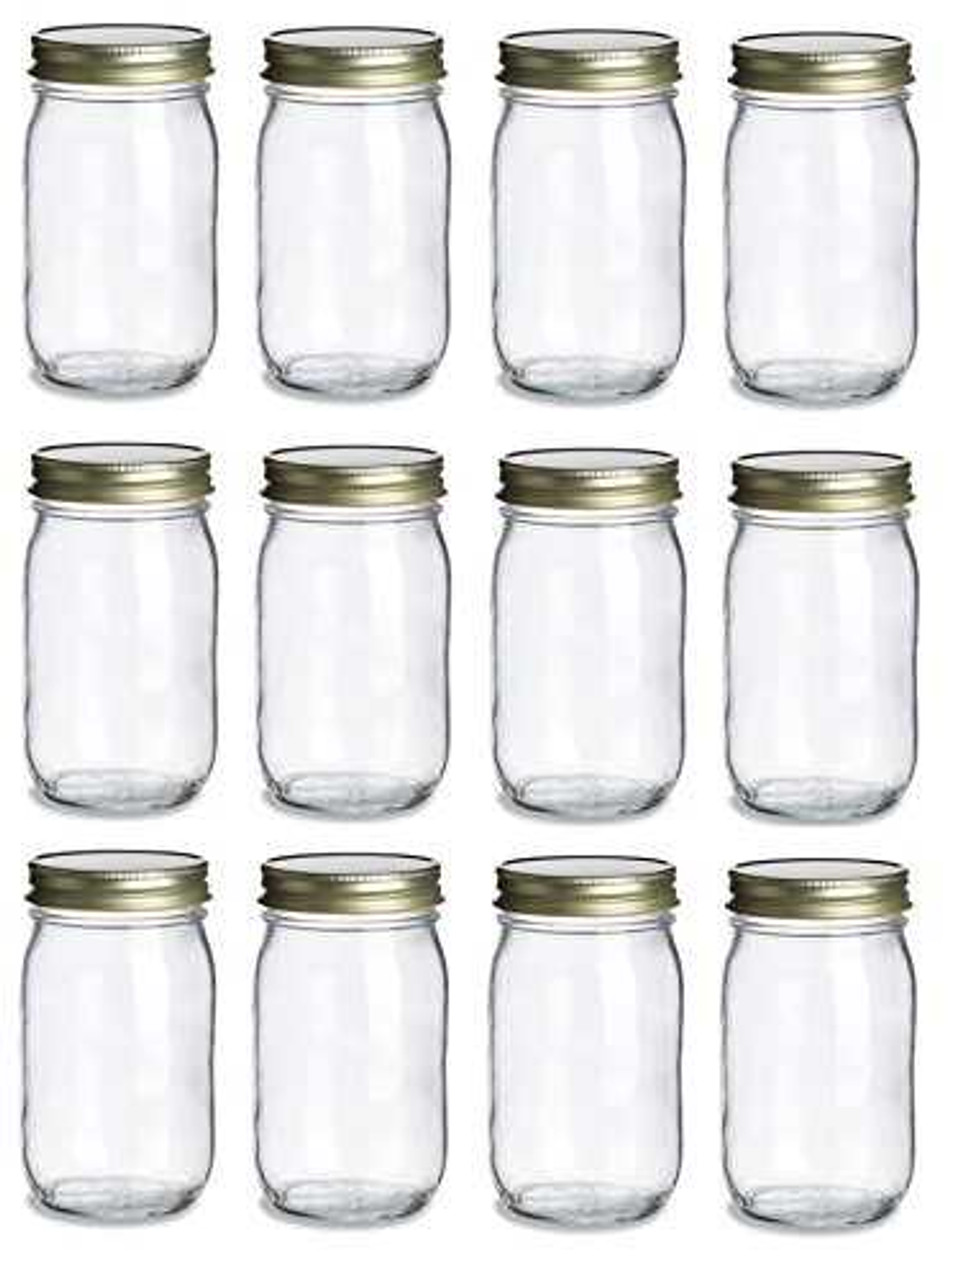 https://cdn11.bigcommerce.com/s-1ybtx/images/stencil/1280x1280/products/842/6041/16-oz-Mason-Glass-Jar-with-your-choice-of-lid-Pint-Made-In-USA_3069__53050.1674334359.jpg?c=2?imbypass=on